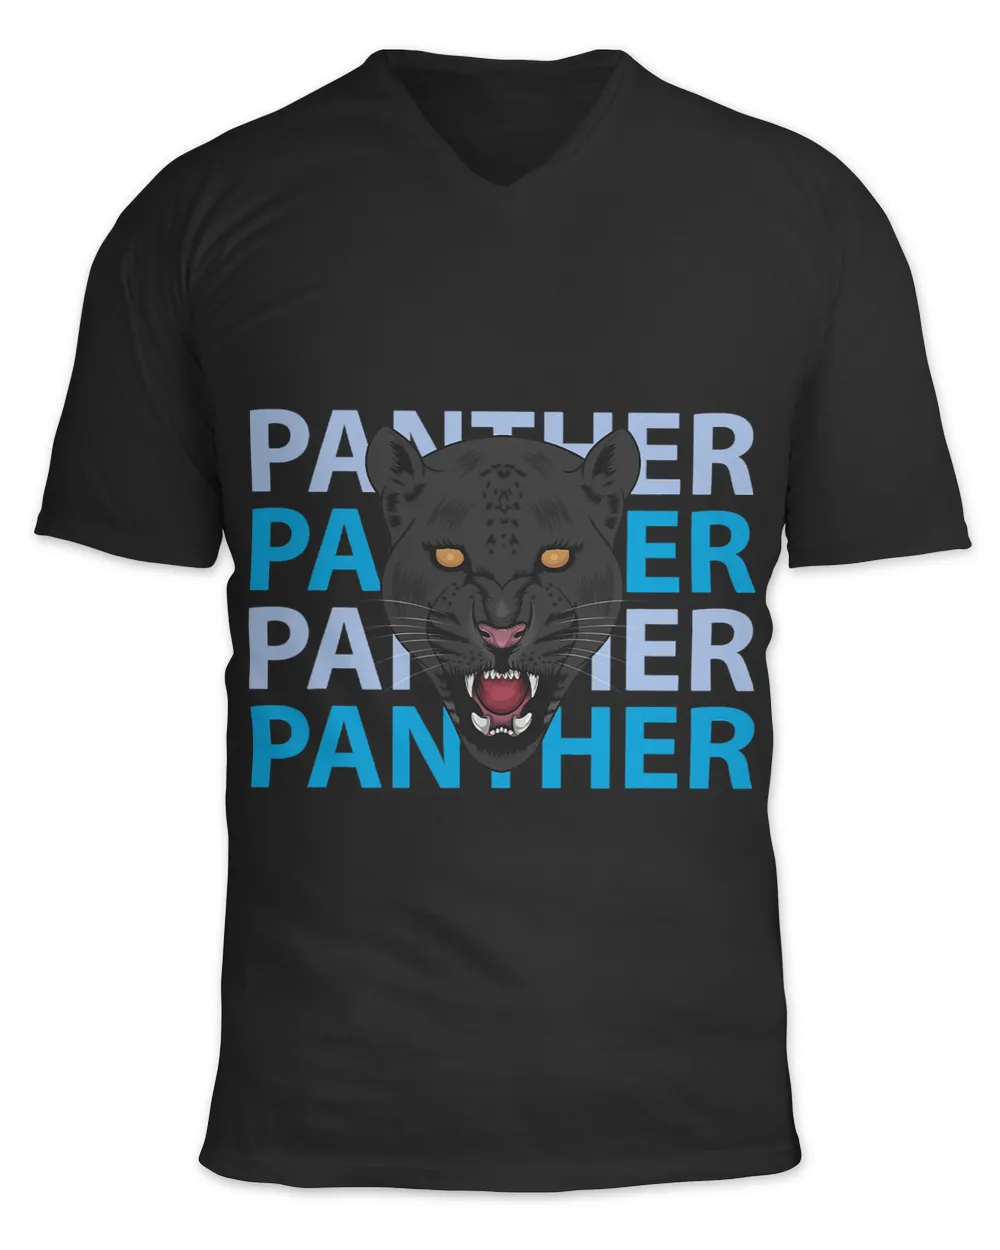 Panther Gift Grey Panther Design Motivation Graphic Outwear Design Tees